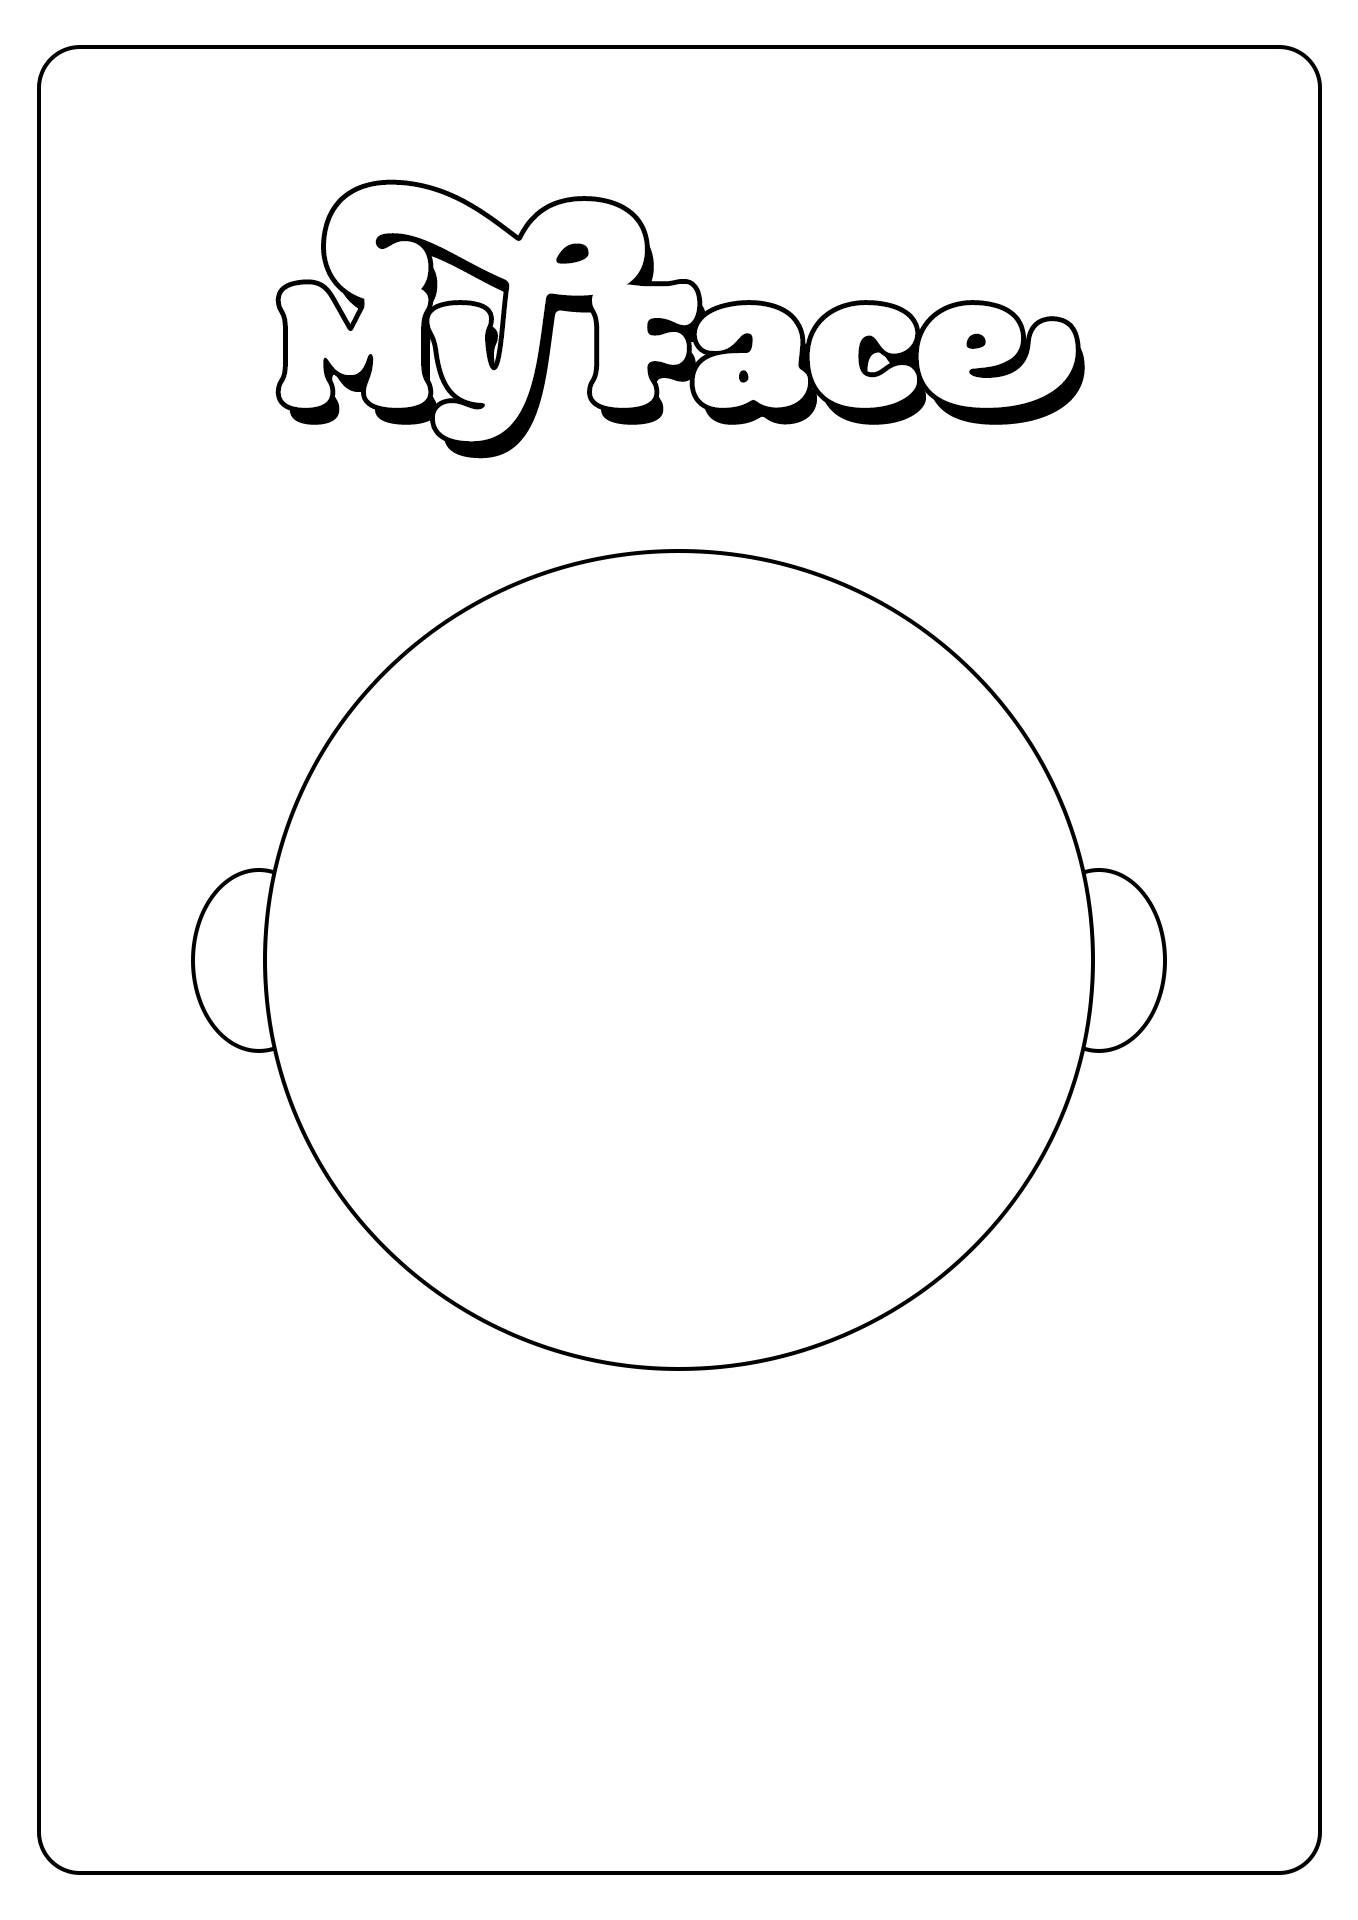 12 Best Images of Self Portrait First Day Of School Worksheets Self